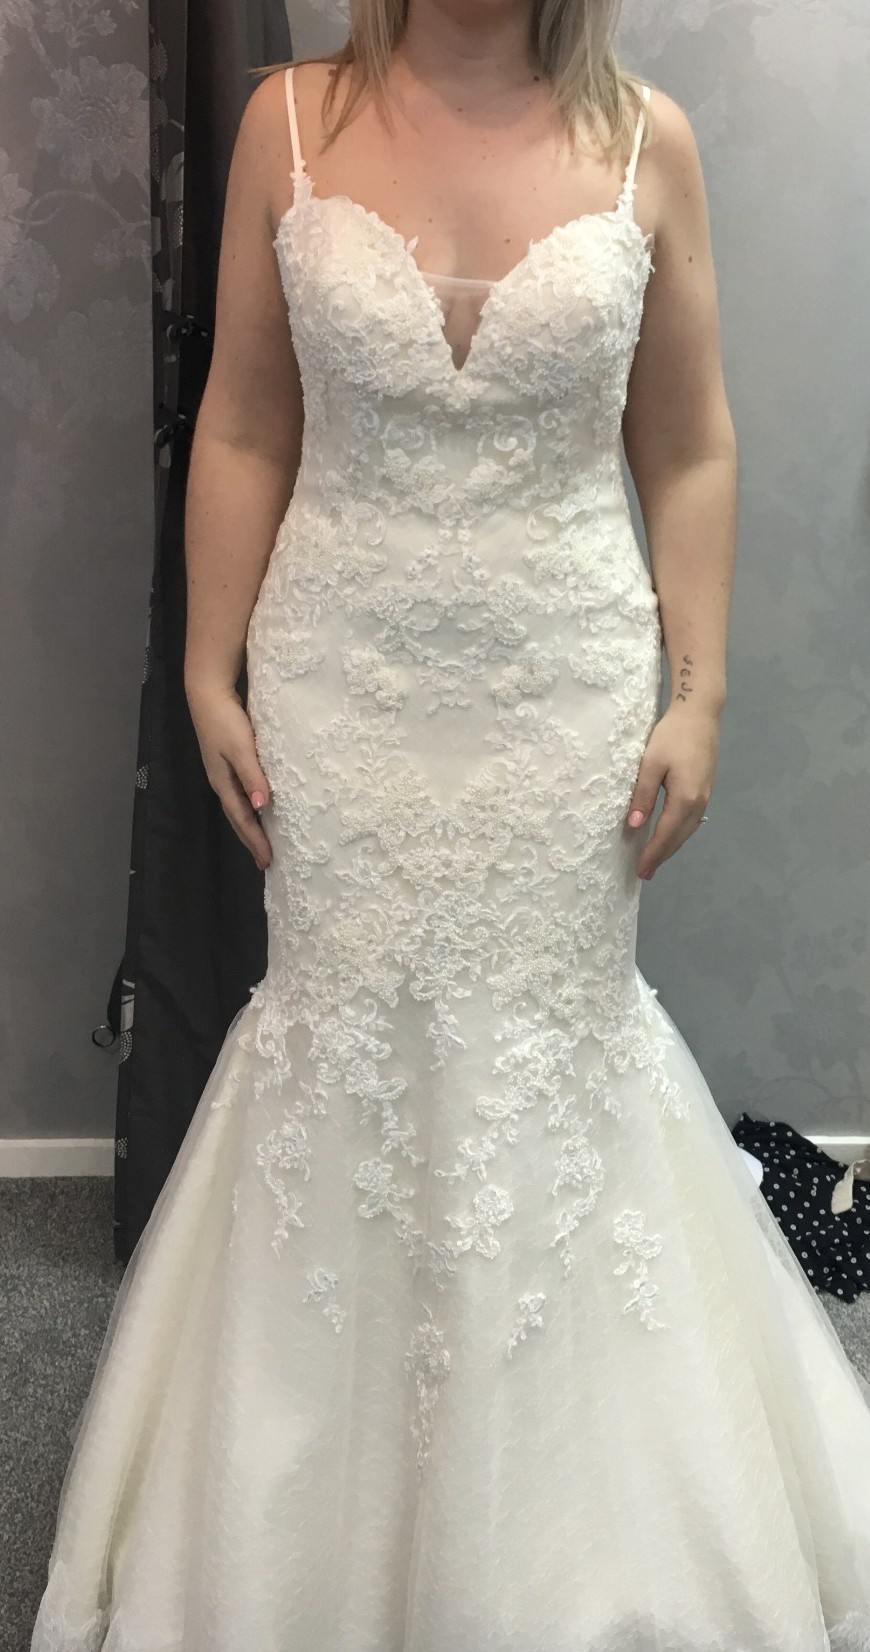 beautiful by enzoani prices